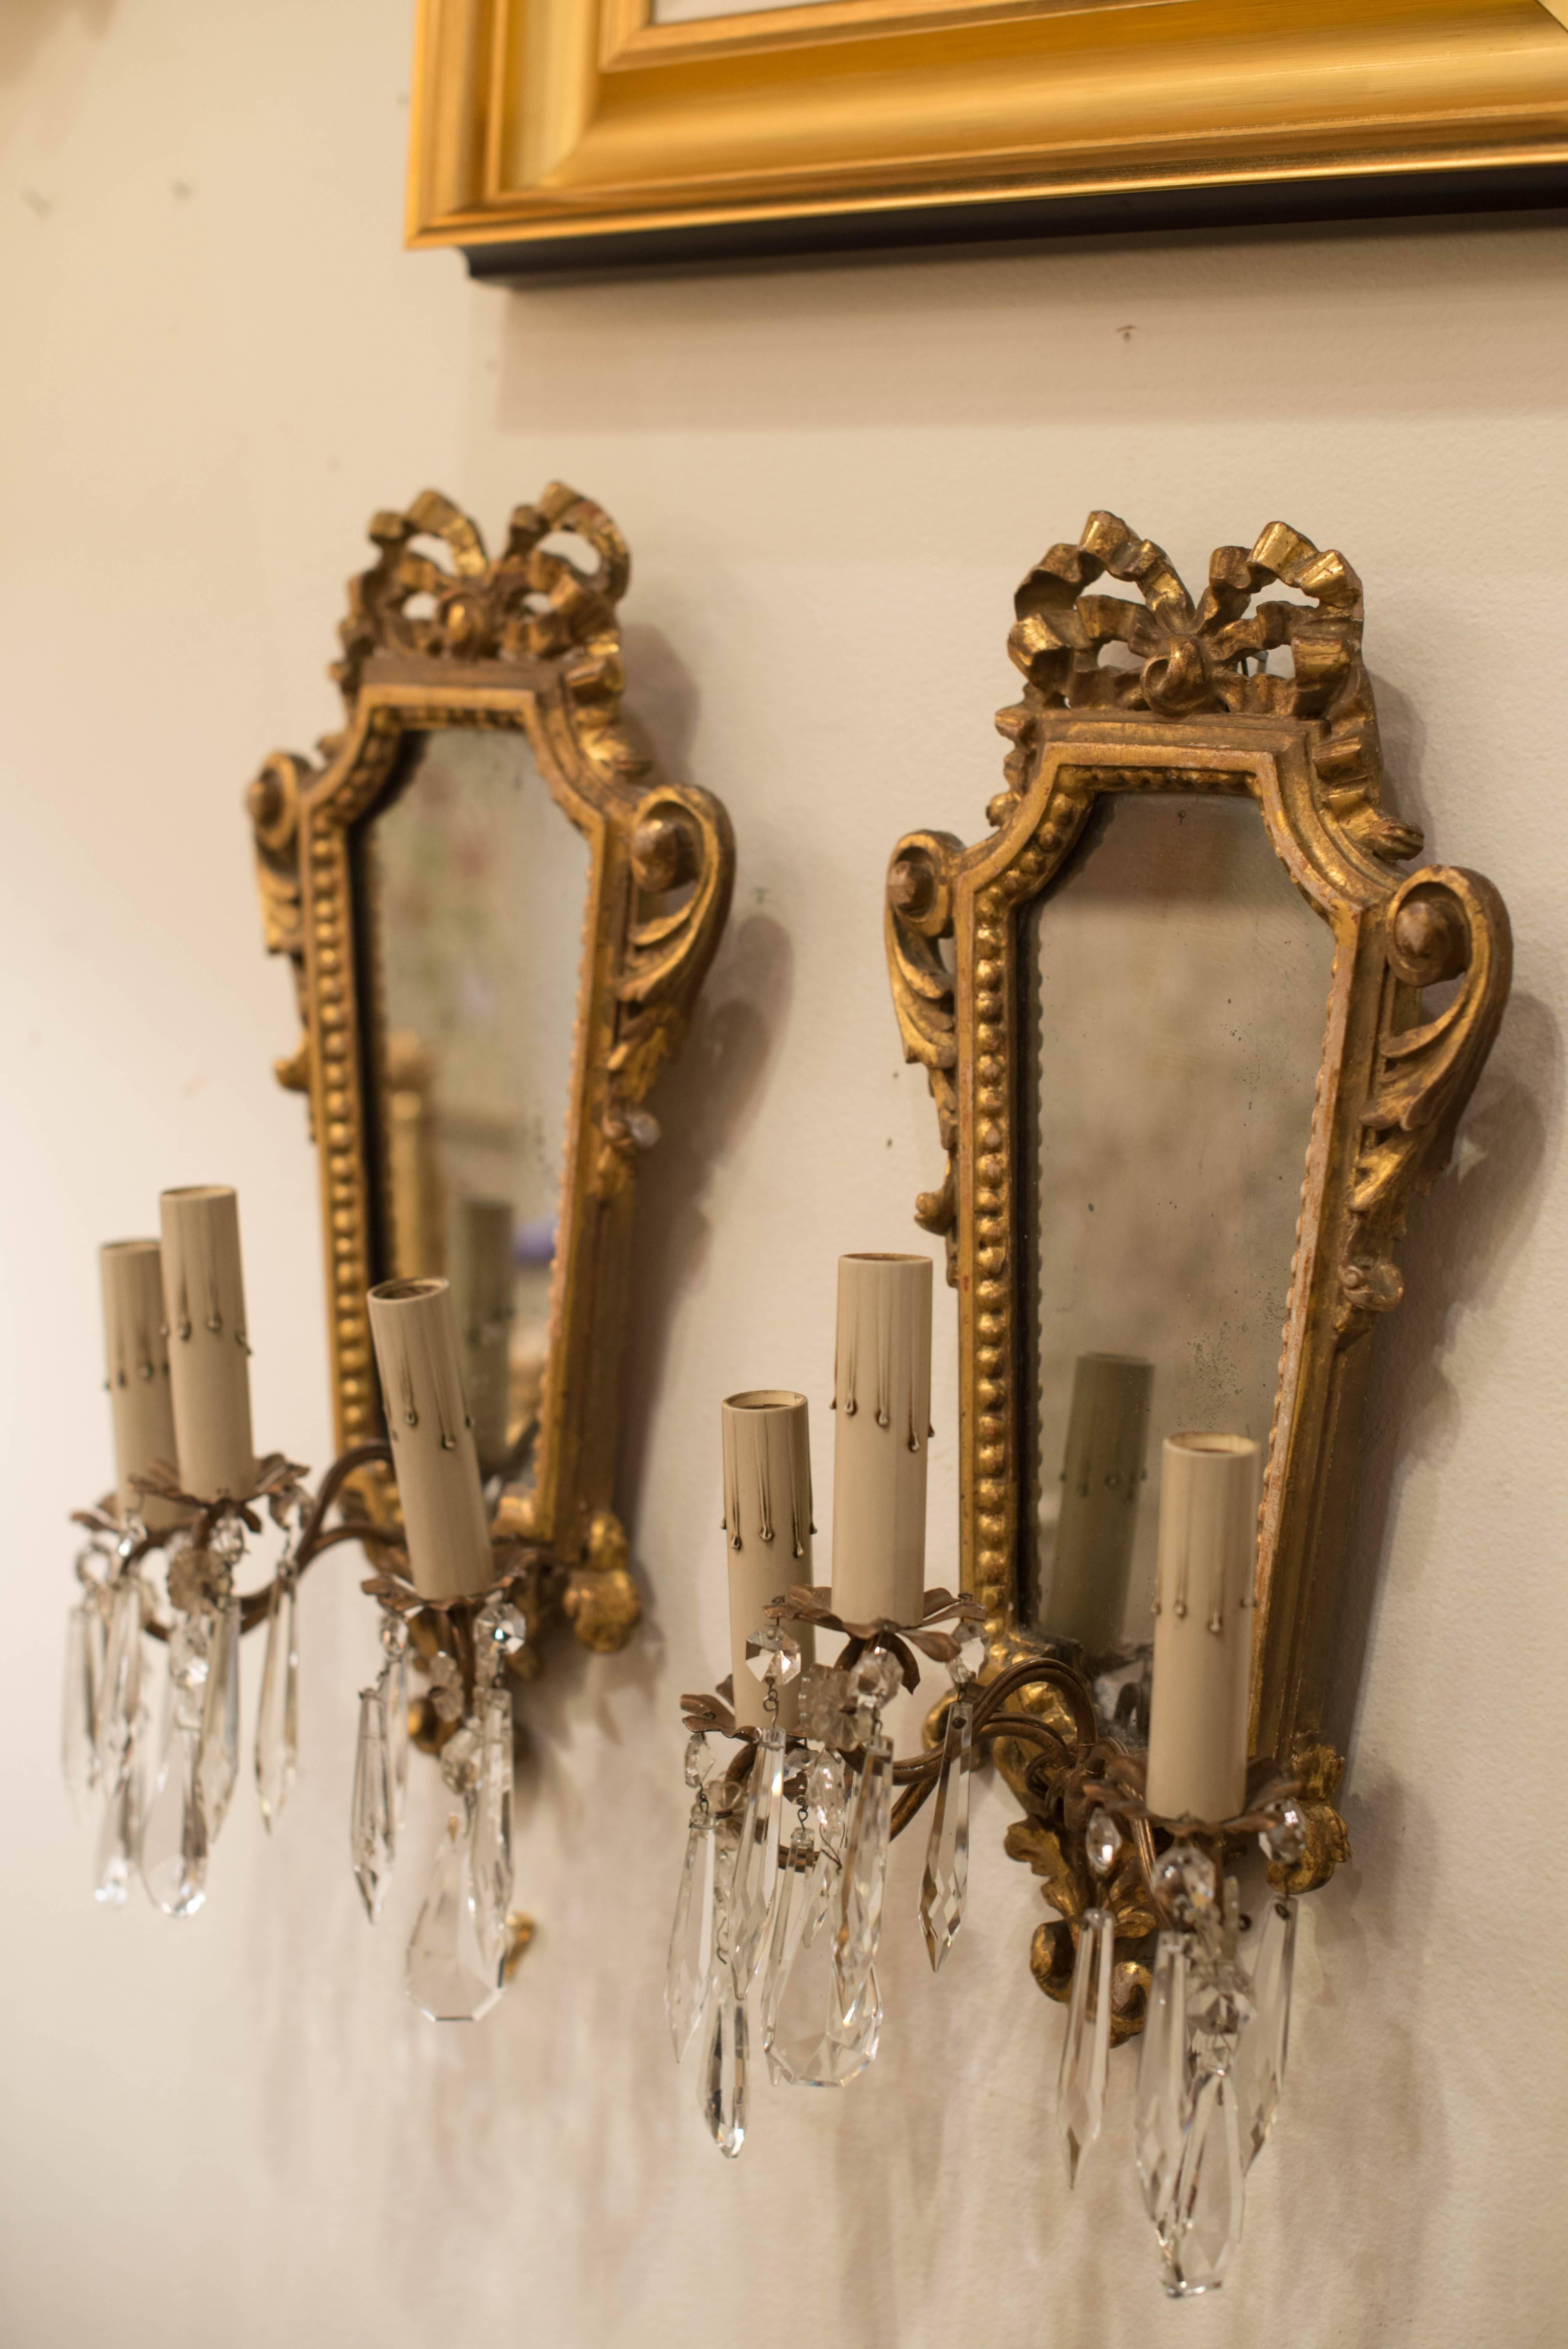 This pair of 19th Century Italian giltwood three arm sconces features a mirrored back and a lovely bow and acanthus motif.  The arms have crystal prisms in different shapes and sizes.  These sconces have been newly rewired.